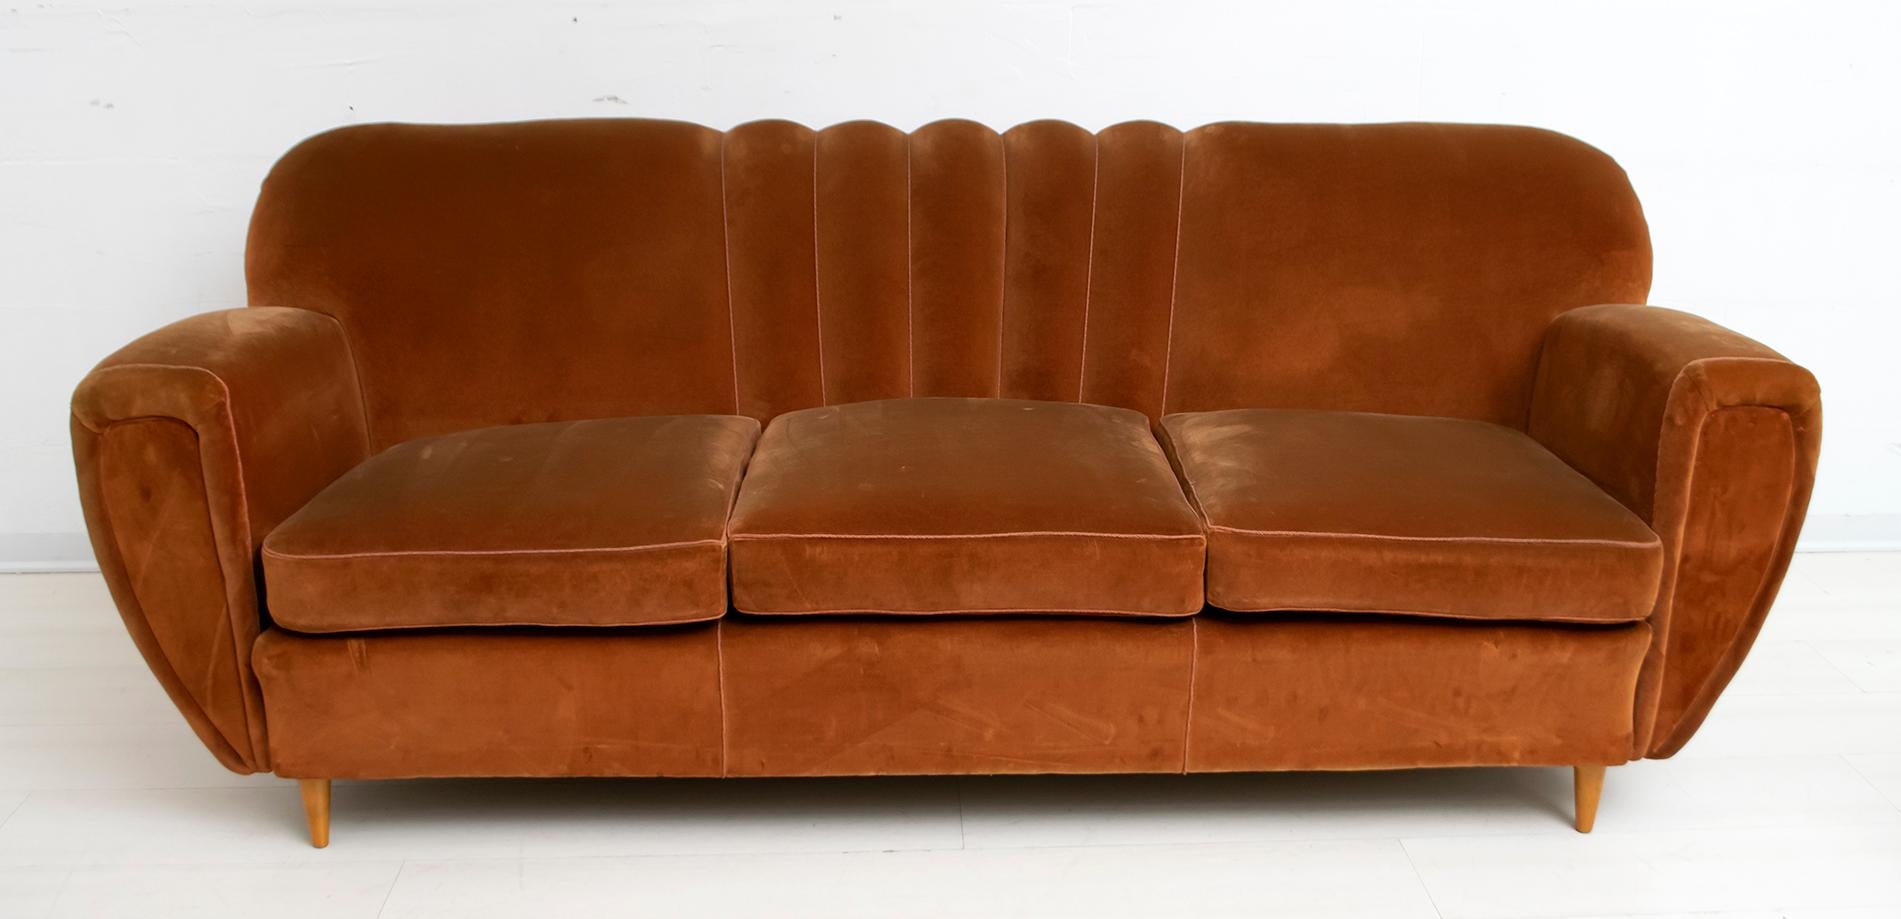 Particular sofa and pair of armchairs attributed to the famous architect Guglielmo Ulrich, the upholstery is original of the time but replacement is recommended. 1940s production in Art Deco style.

The armchairs measure:
cm H 82 x W 95 x D 98 x